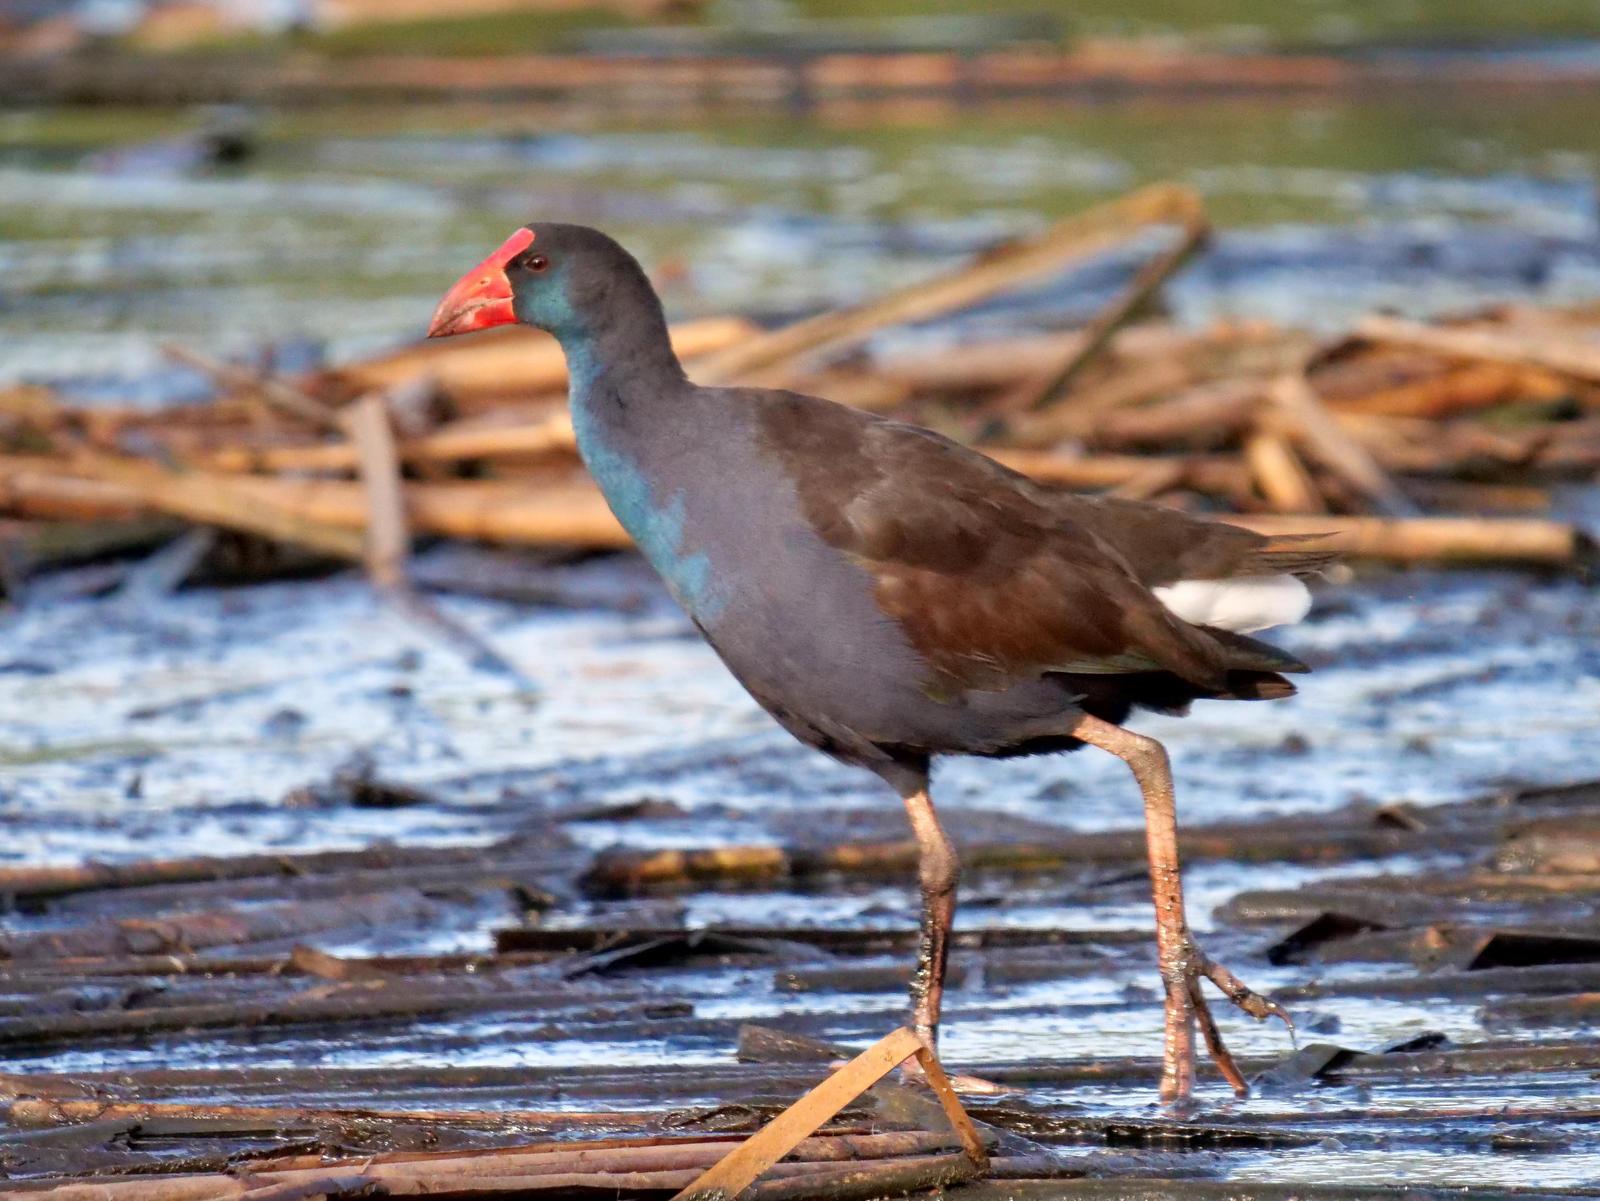 Australasian Swamphen Photo by Peter Lowe